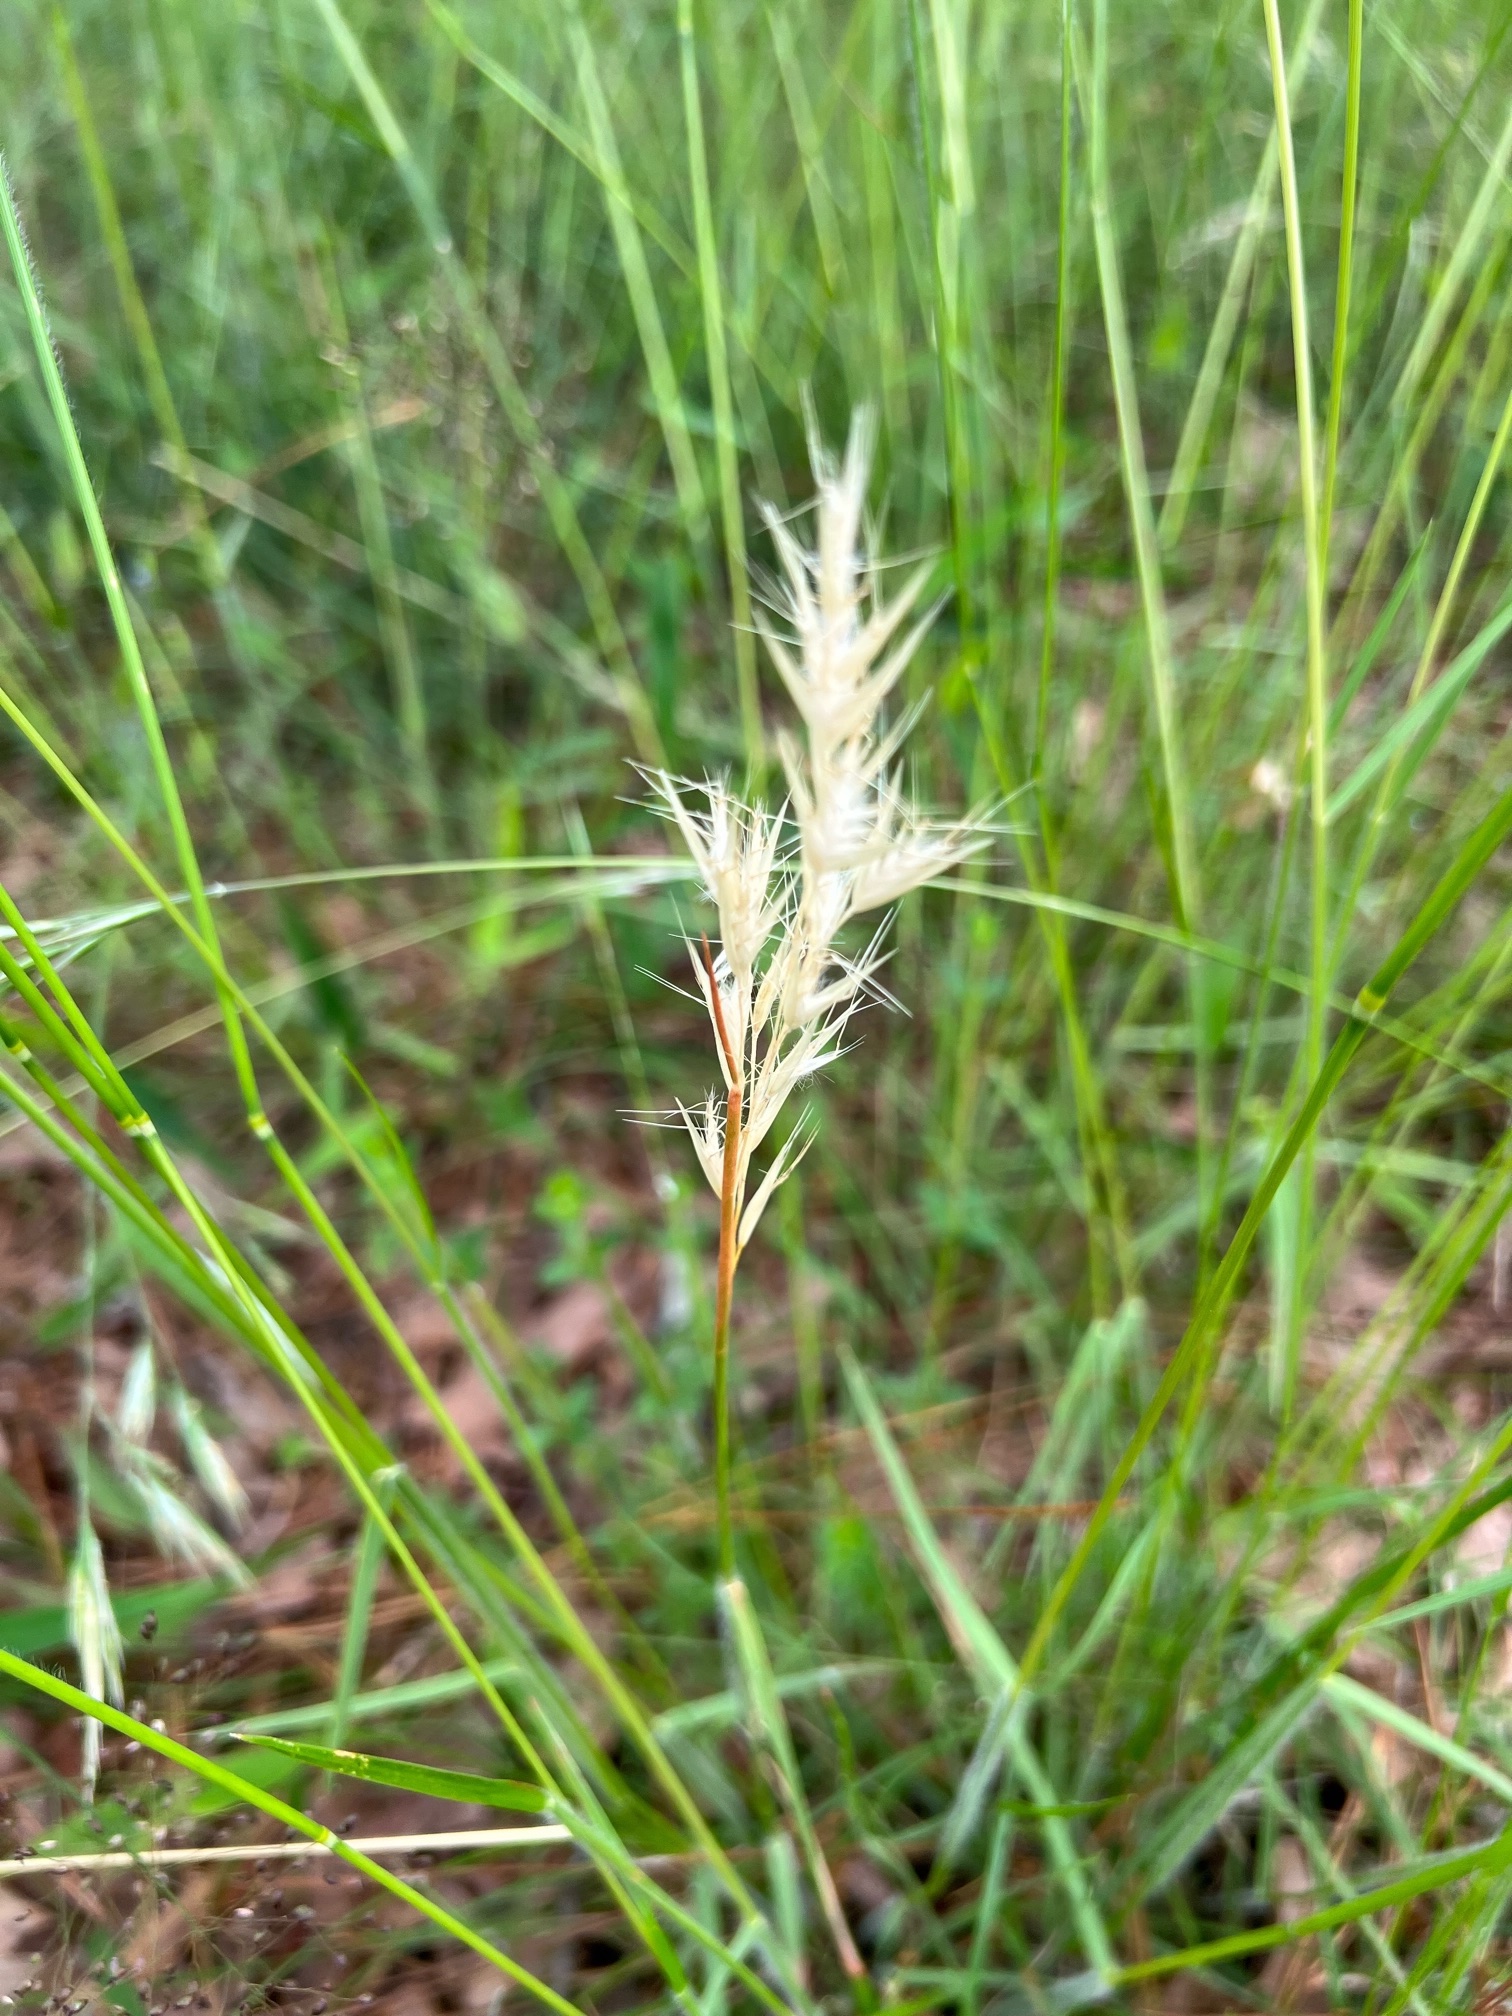 The Scientific Name is Danthonia sericea. You will likely hear them called Silky Oat-grass, Downy Danthonia. This picture shows the Close-up of inflorescence. Note the presence of awns and the white villous hairs which arise from the lemmas. of Danthonia sericea